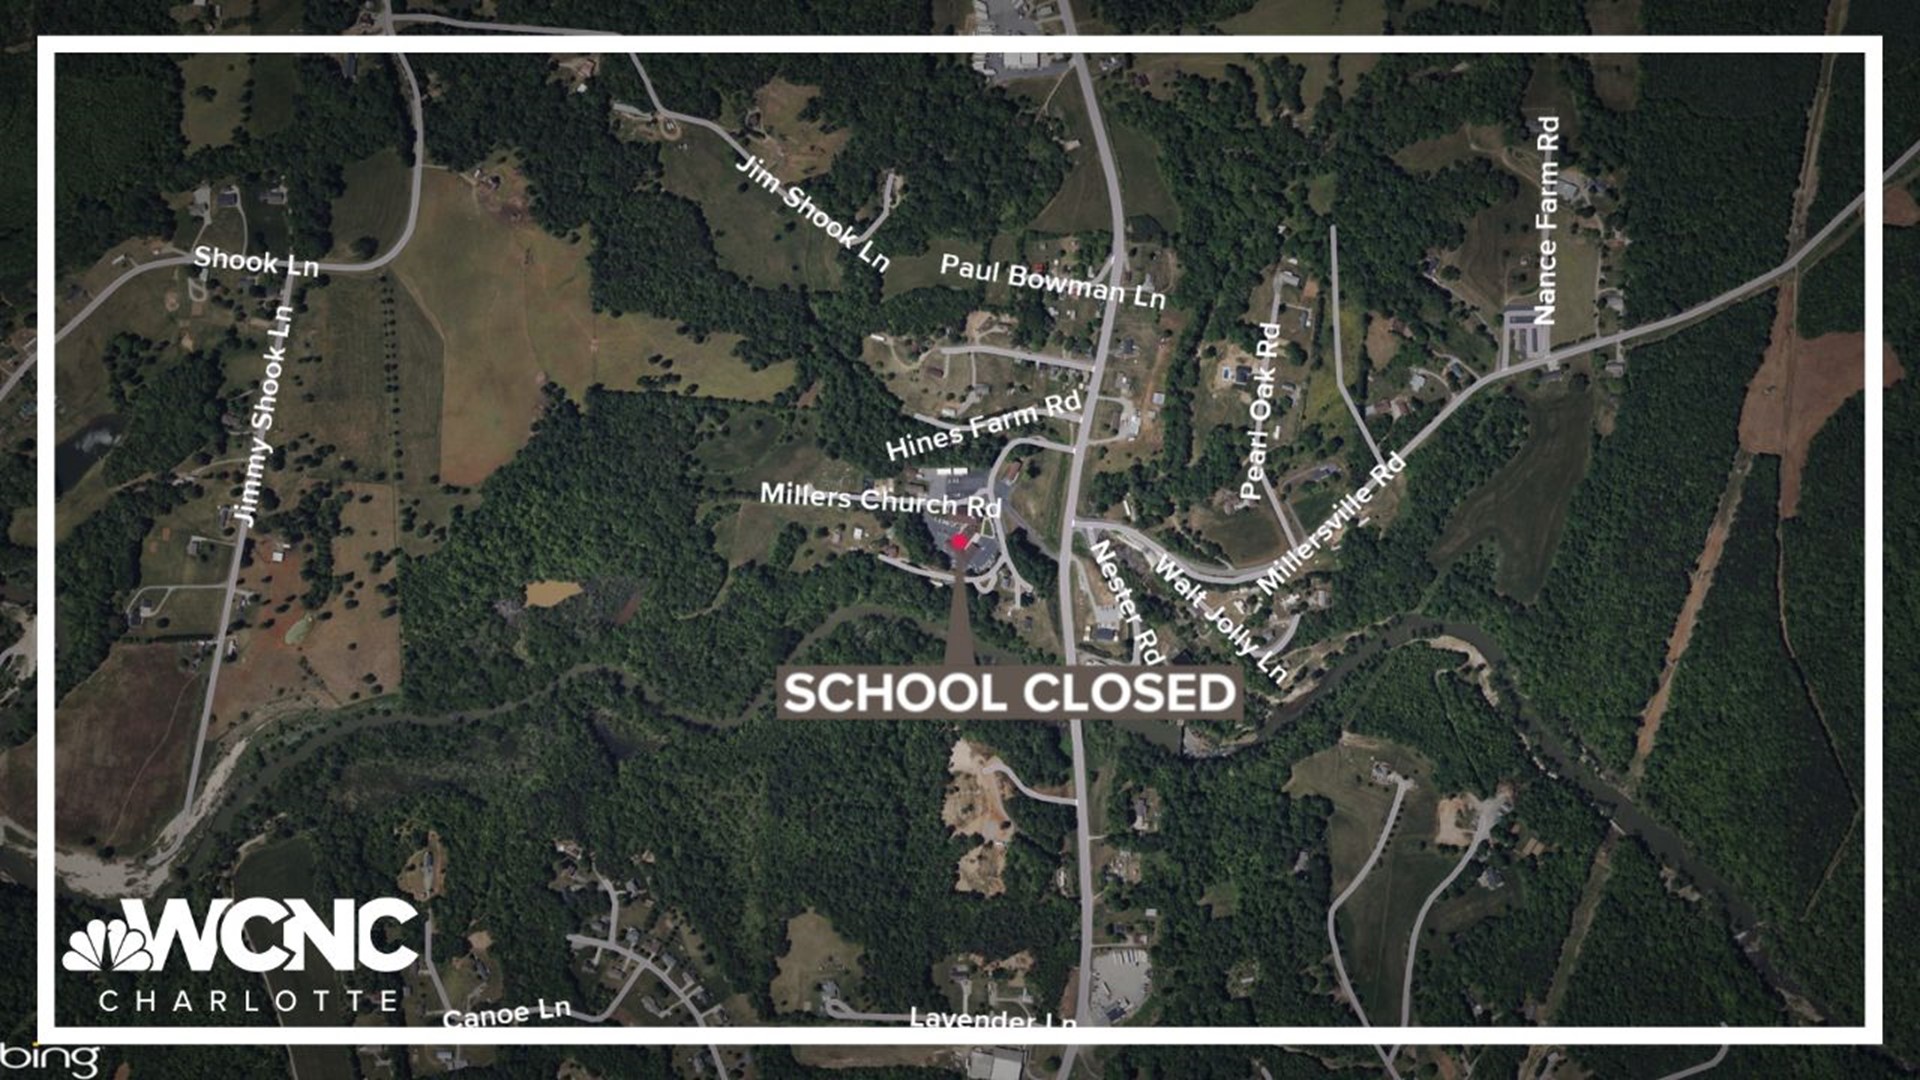 A man is in custody in connection to an incident that closed an Alexander County school.